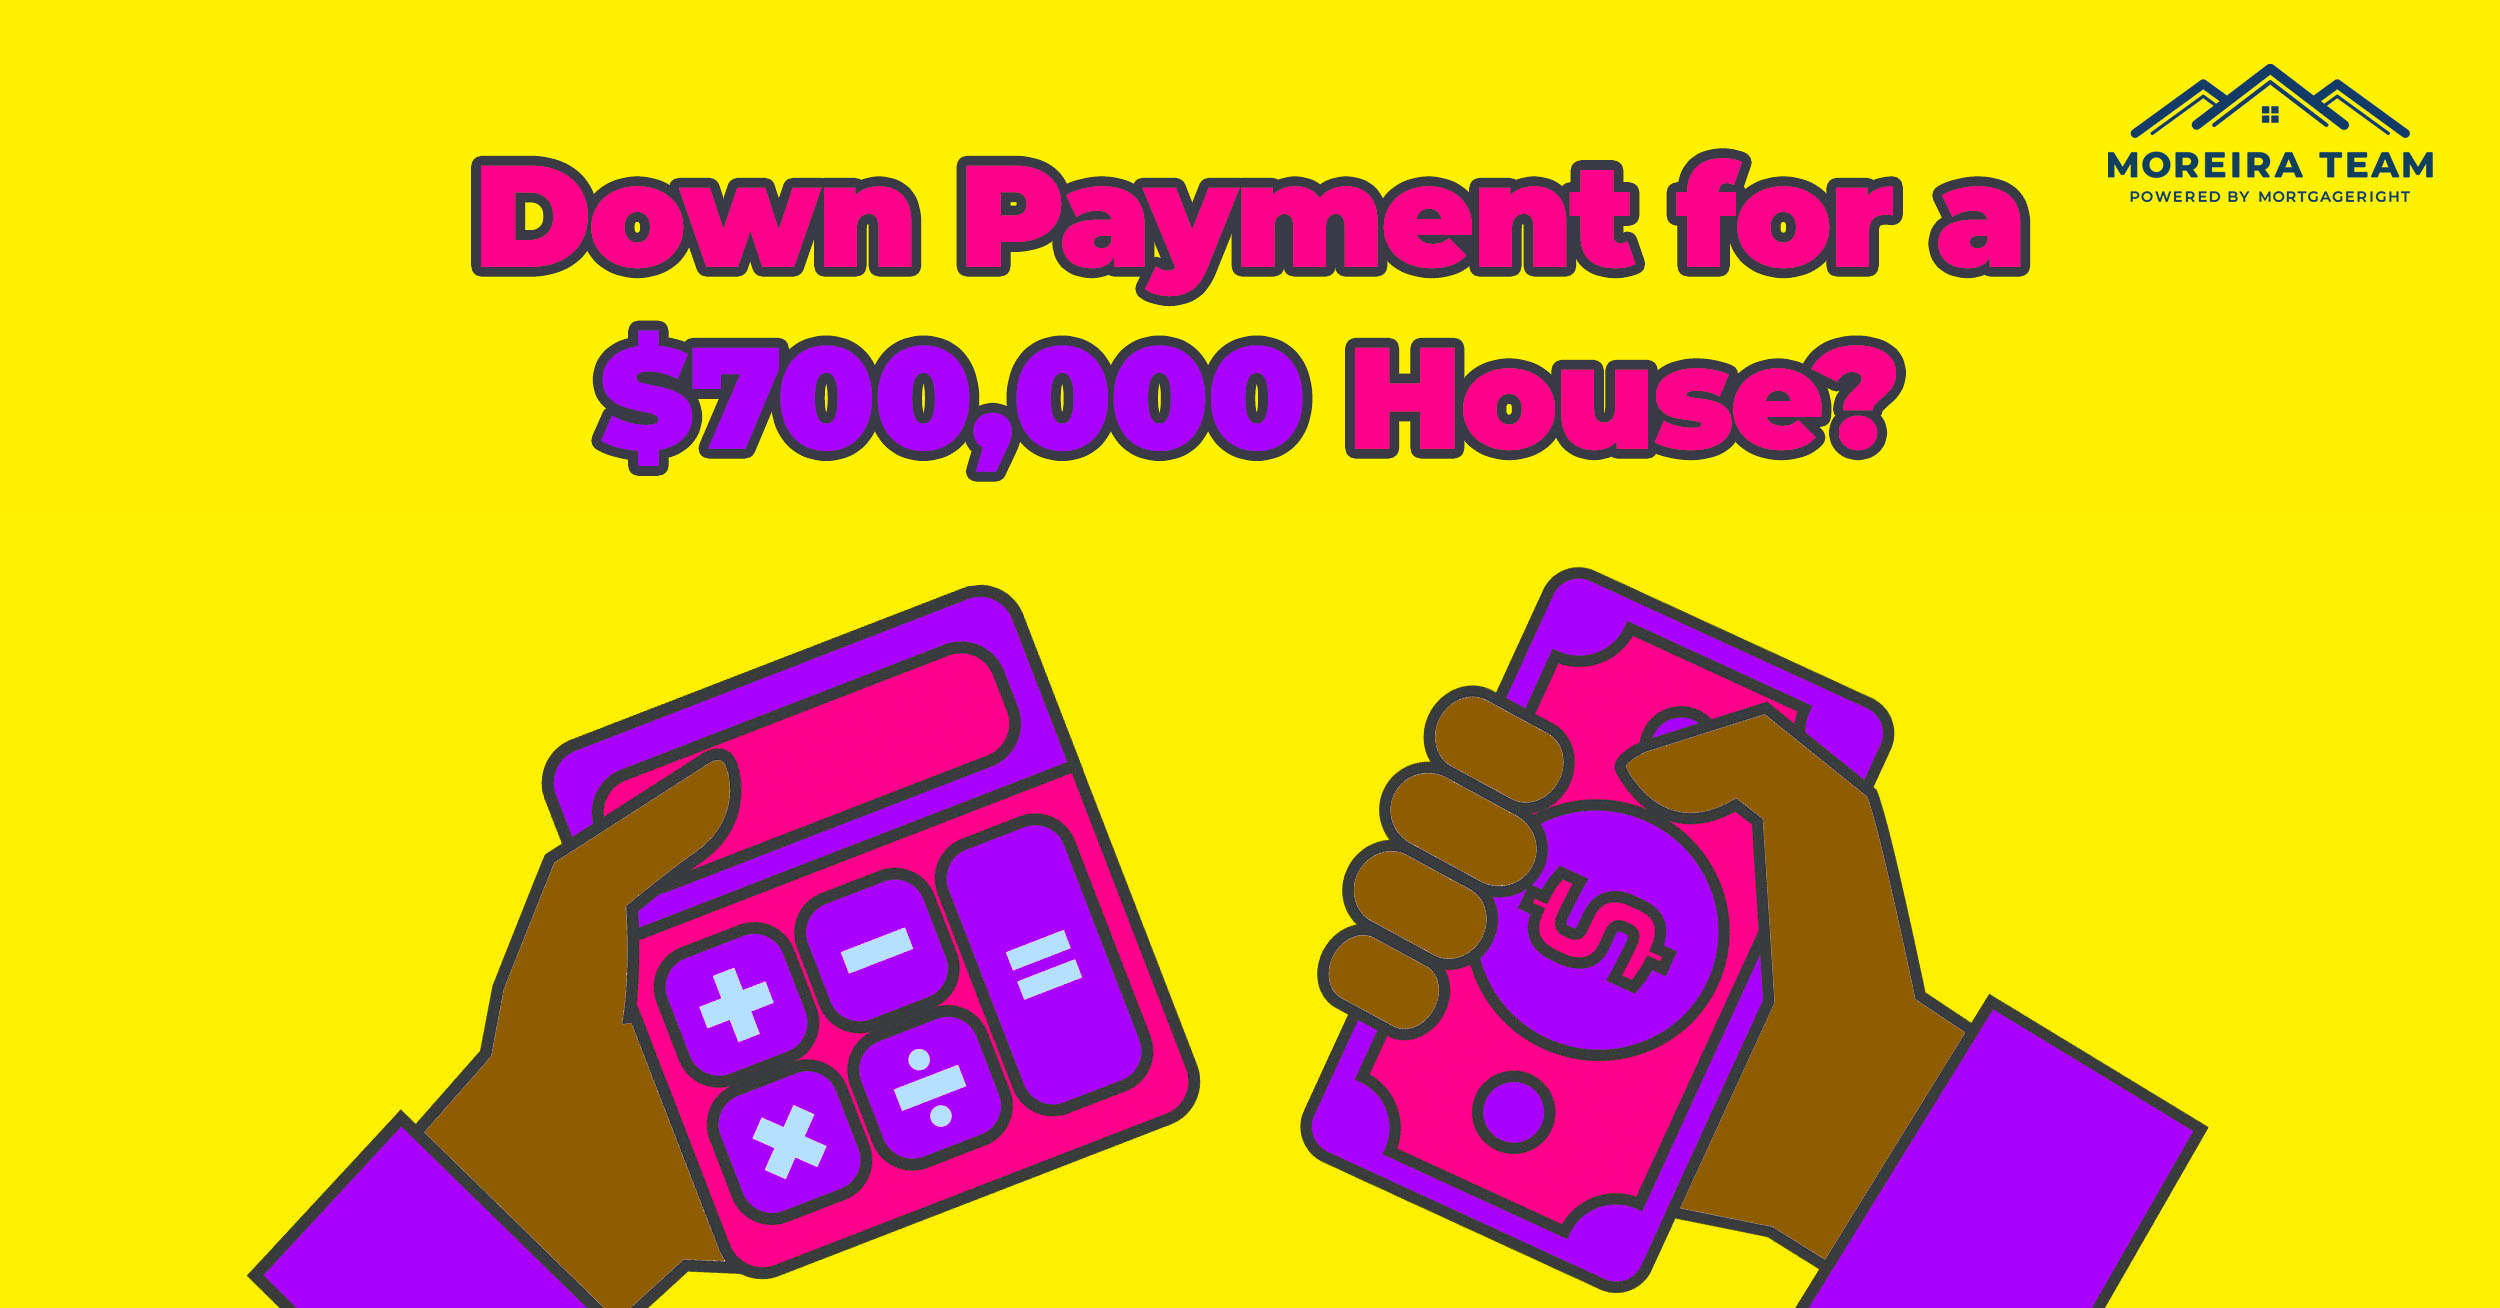 How Much is a Down Payment for a $700,000 Home?